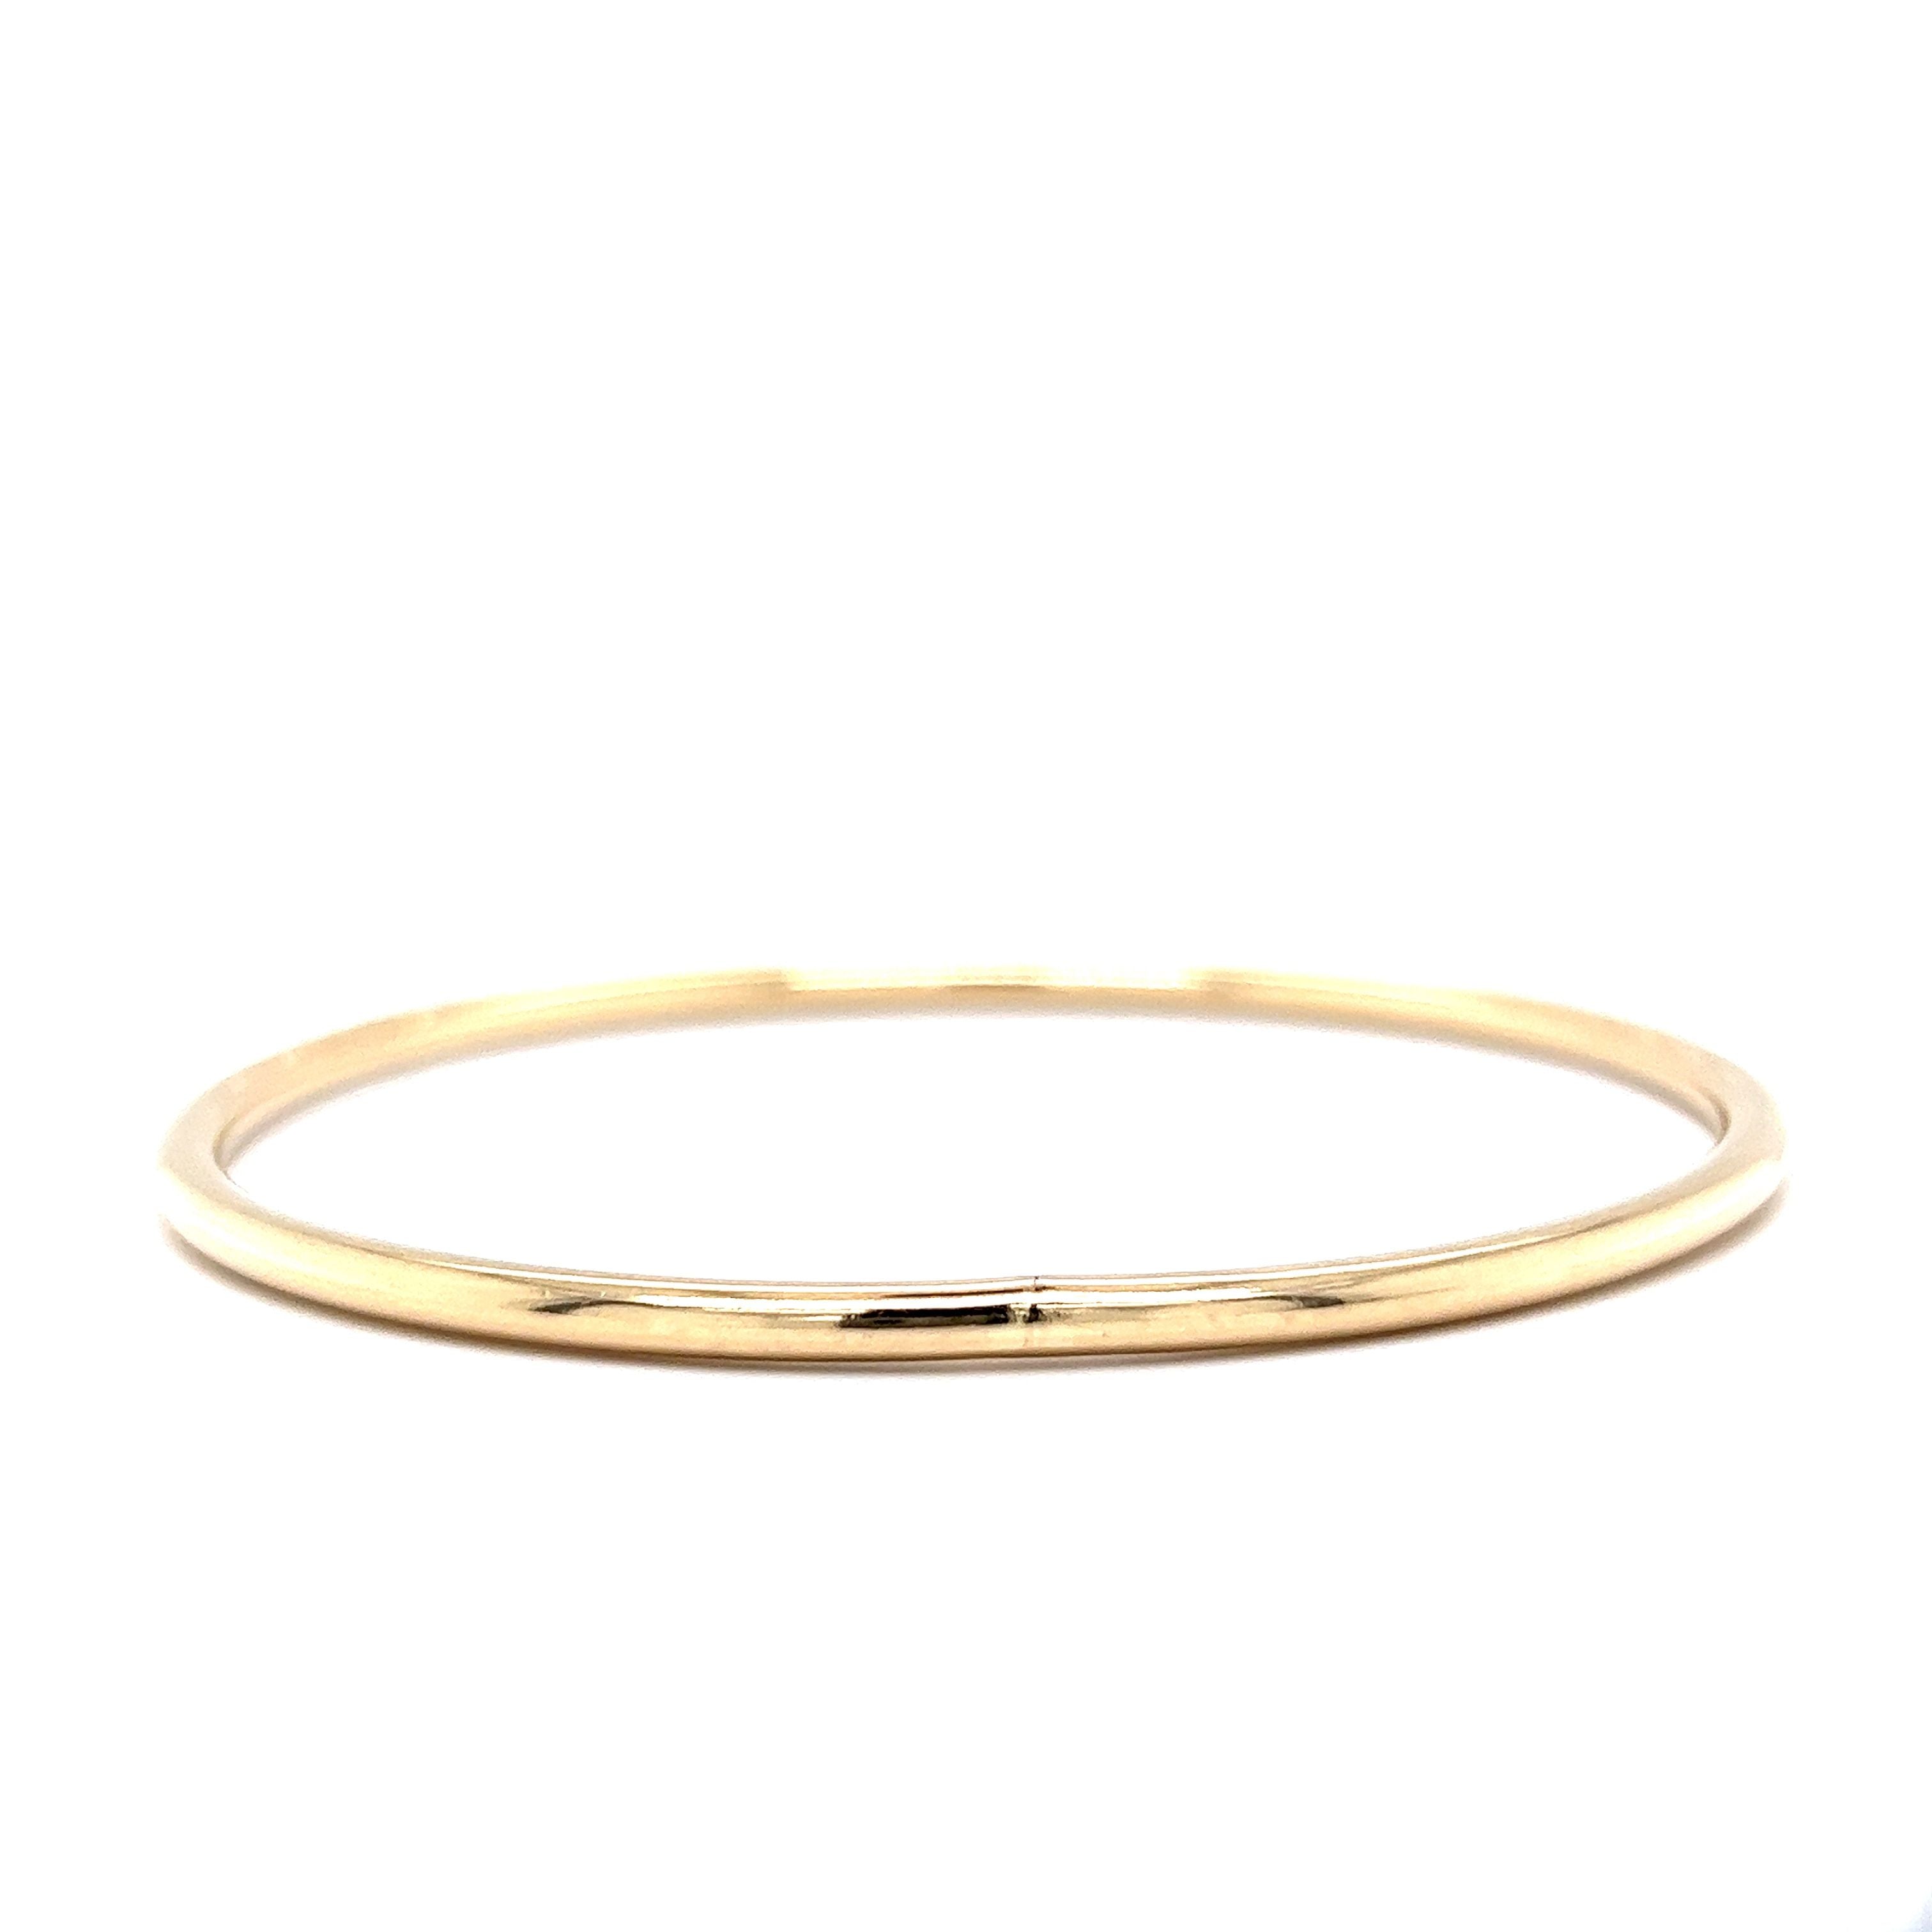 Michael Kors Women's Cubic Zirconia Tapered Baguette and Pave Bangle  Bracelet in 14K Gold-Plating Over Sterling Silver - iCuracao.com